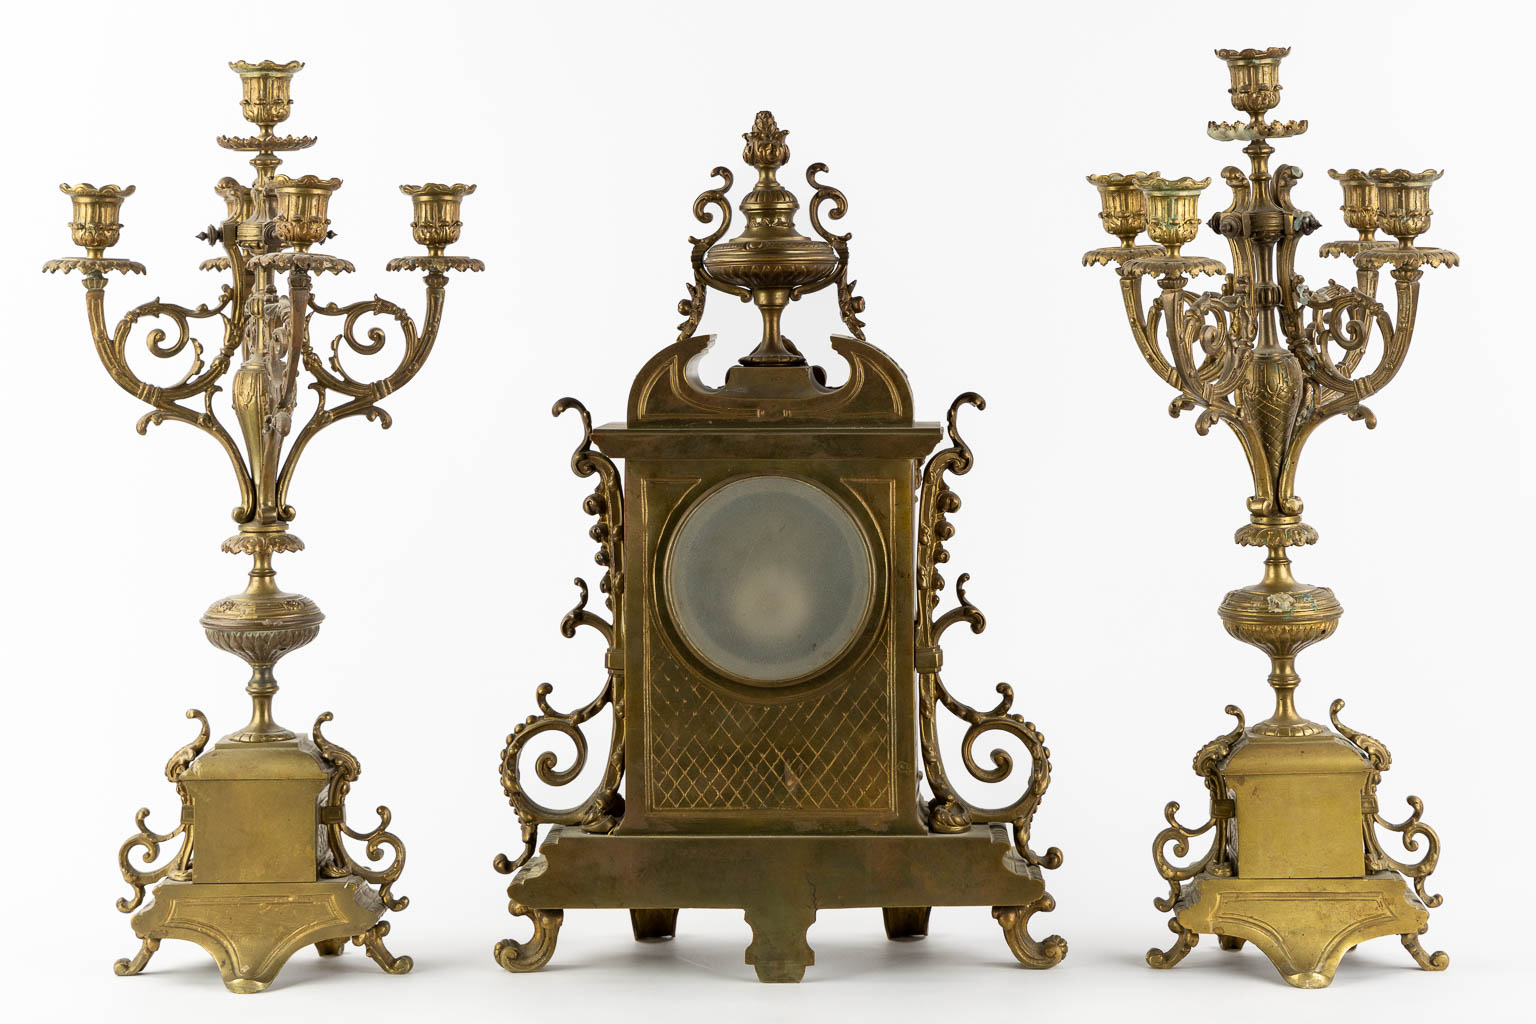 A three-piece mantle garniture clock and candelabra, patinated bronze. (L:16 x W:33 x H:50 cm) - Image 5 of 13